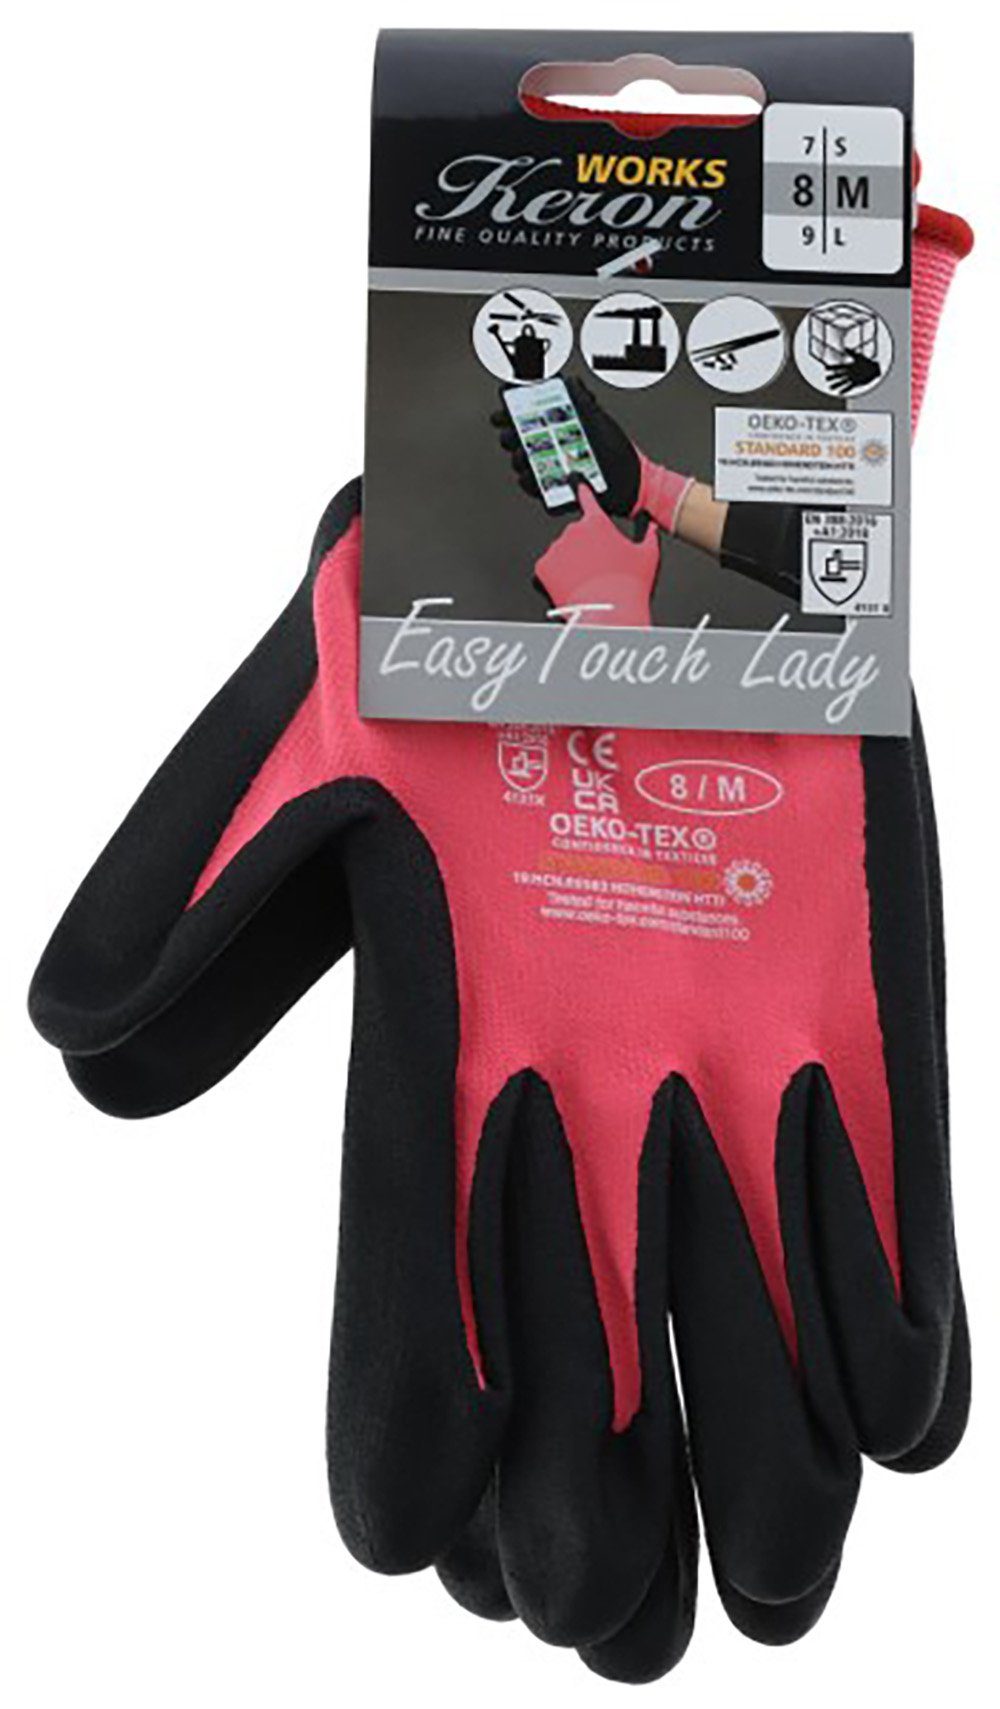 Lady, 7/S, Arbeitshandschuhe Kerbl EasyTouch, pink, 297957 3x Gr. Touchscreenhandschuh